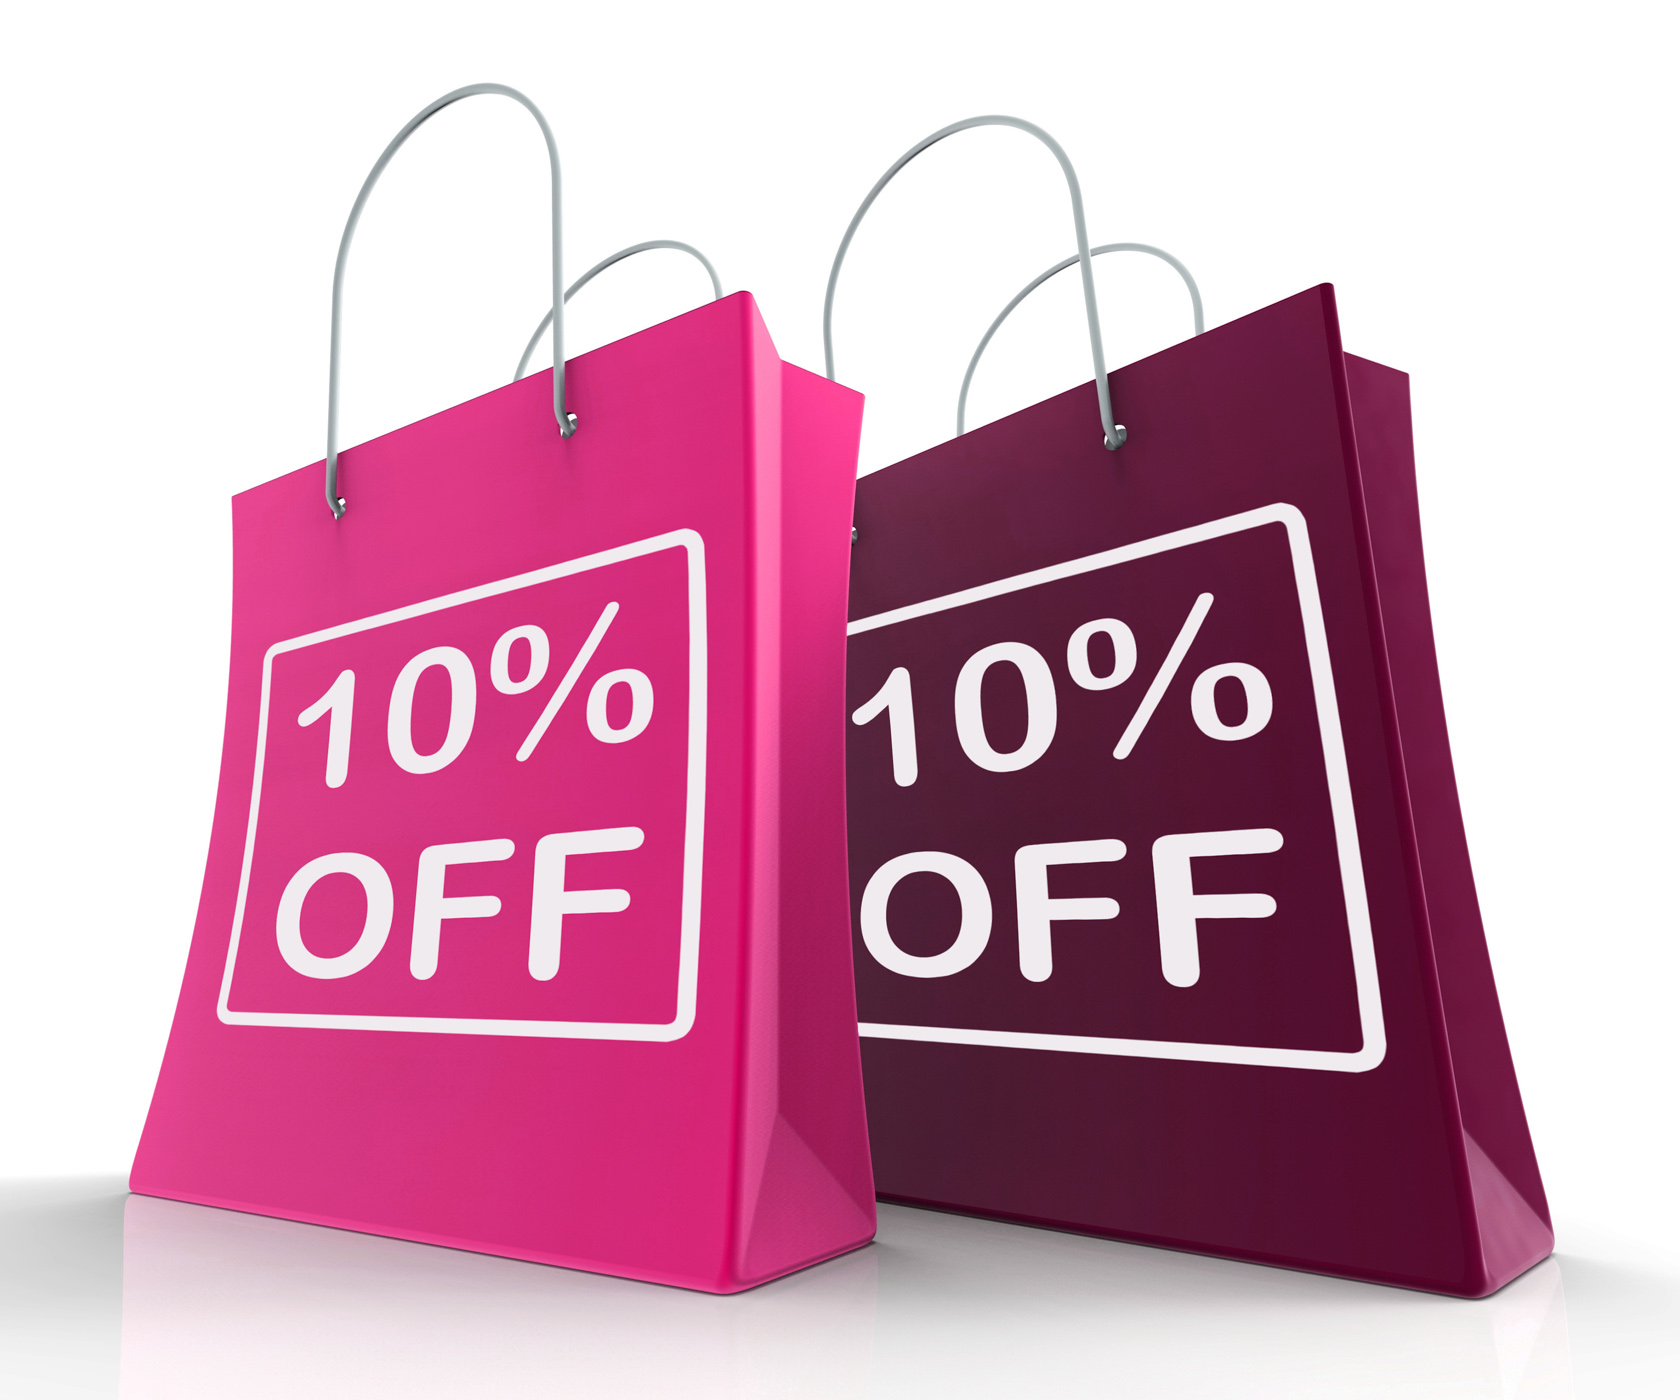 Ten percent off on shopping bags shows 10 bargains photo